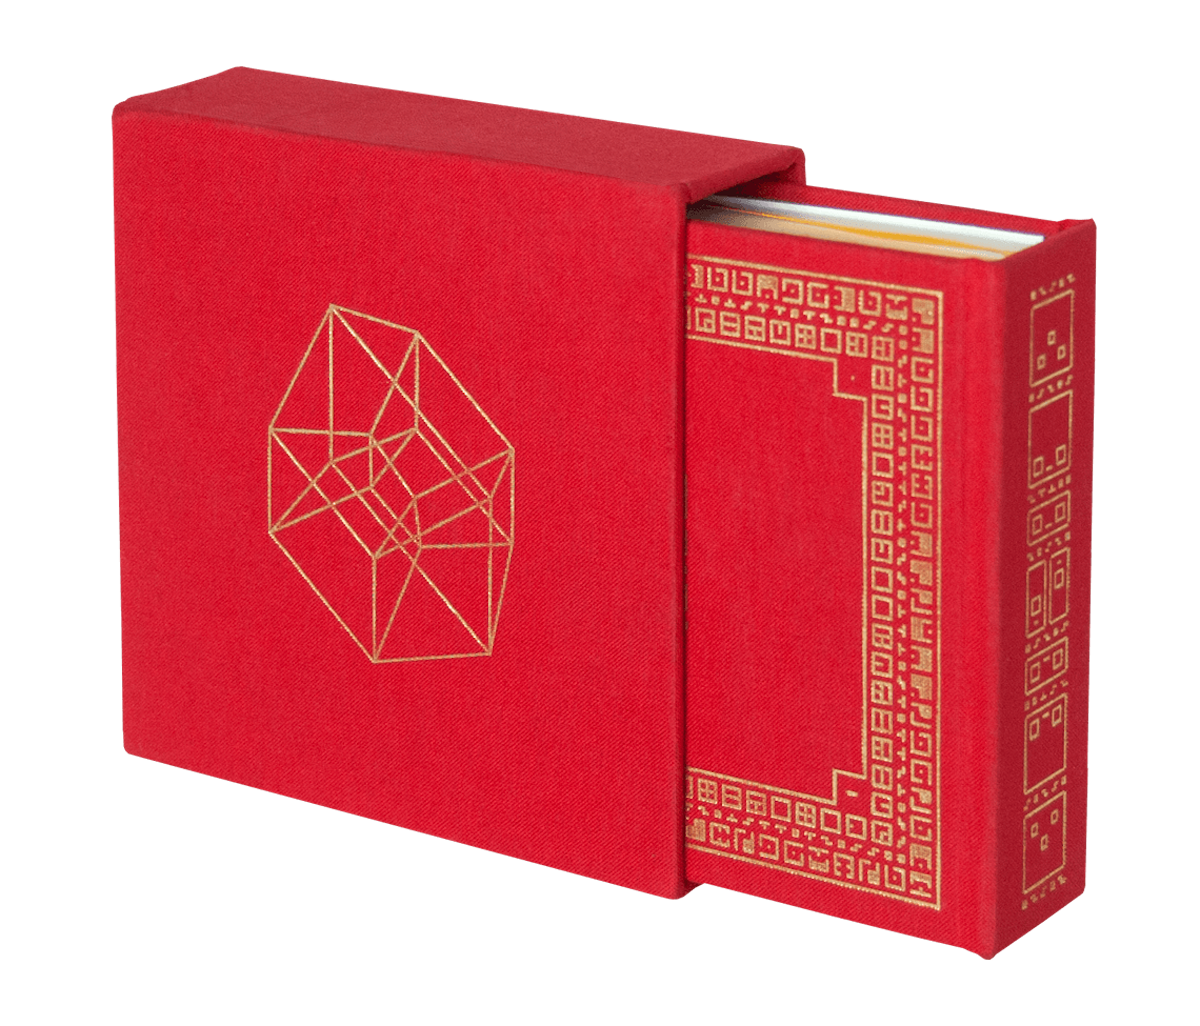 Fez gets physical release